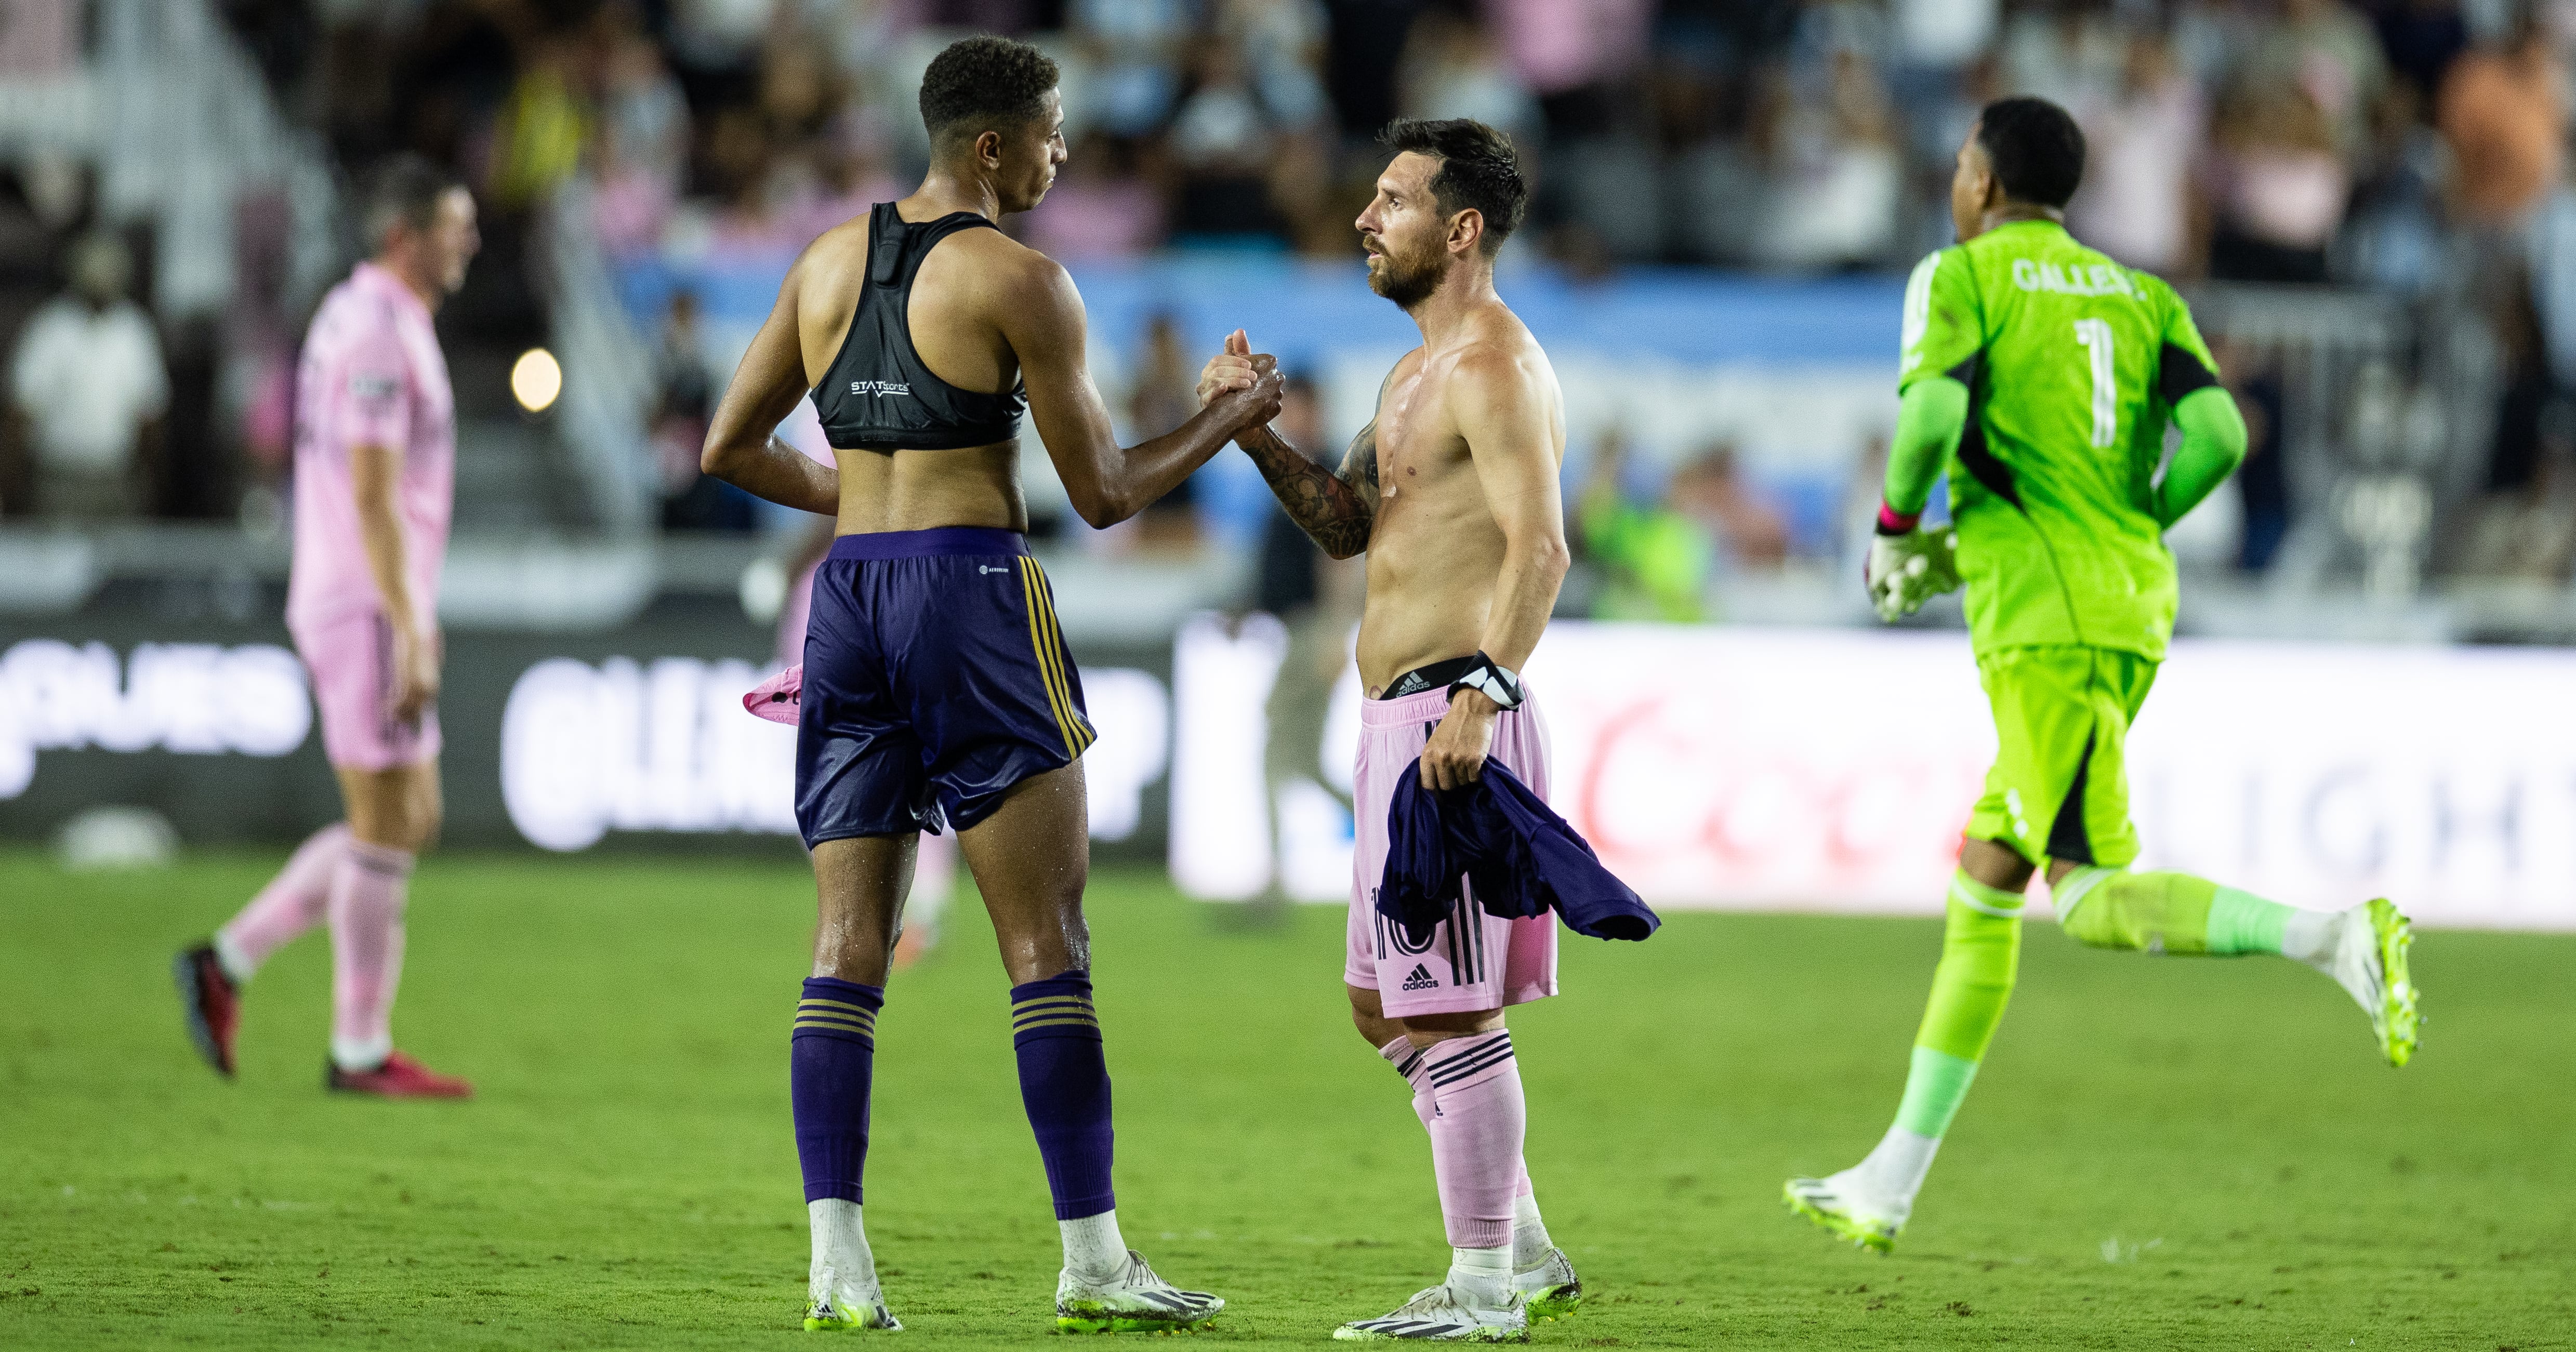 Why Do Soccer Players Wear Bras? It's Not What You Think!